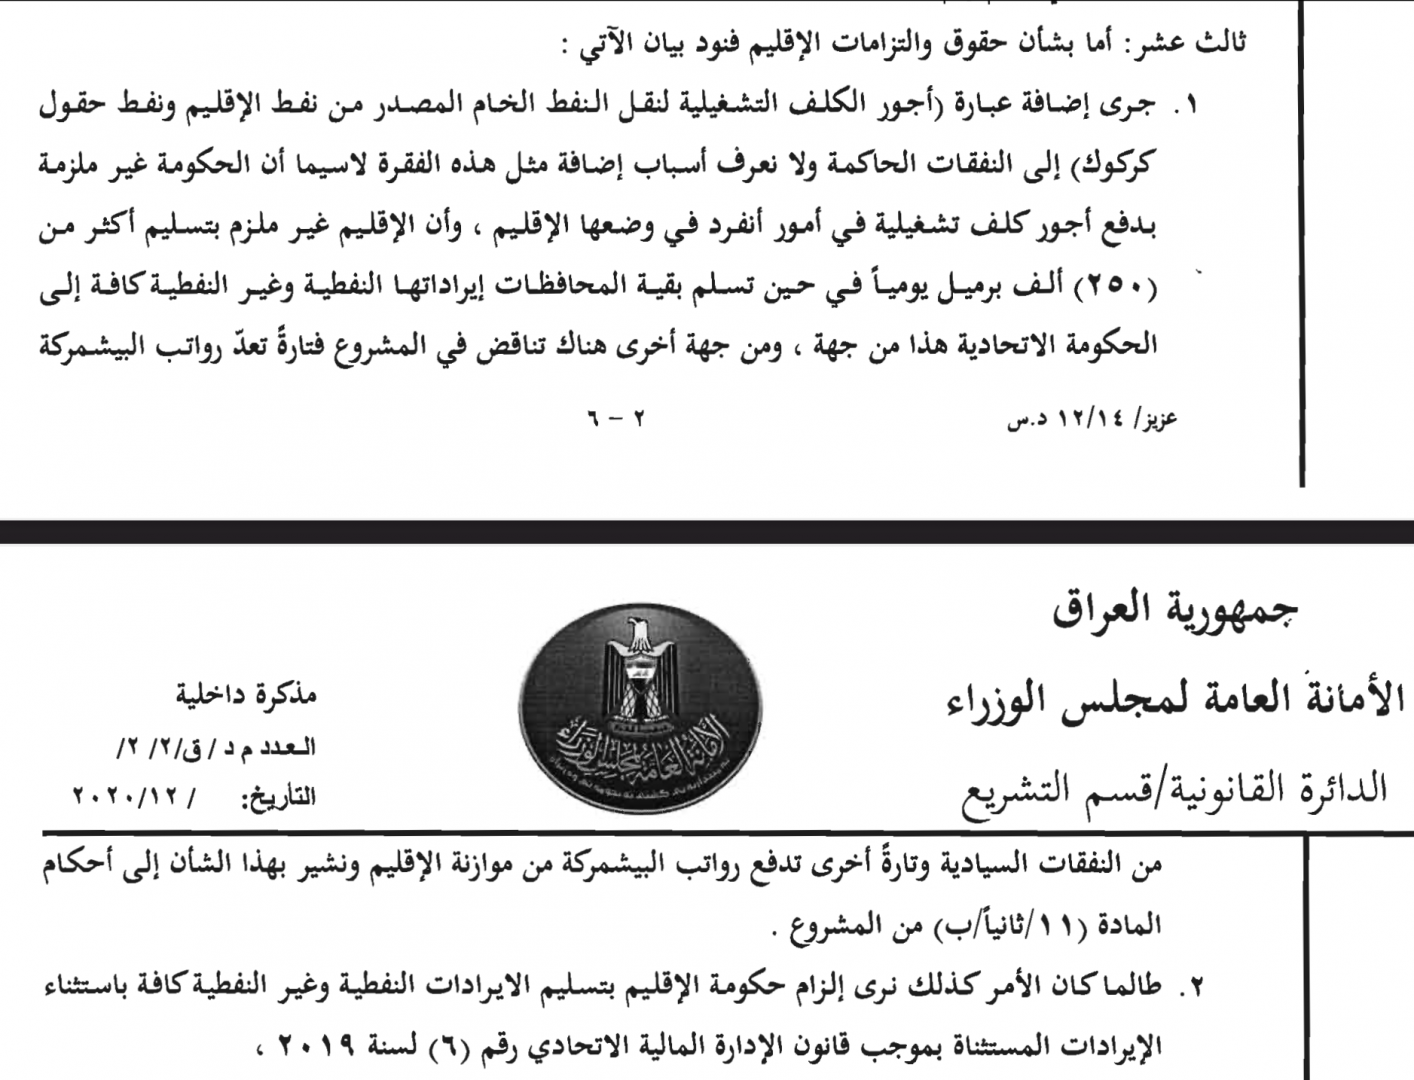 Salih: to insure “Justice” to all Iraqis